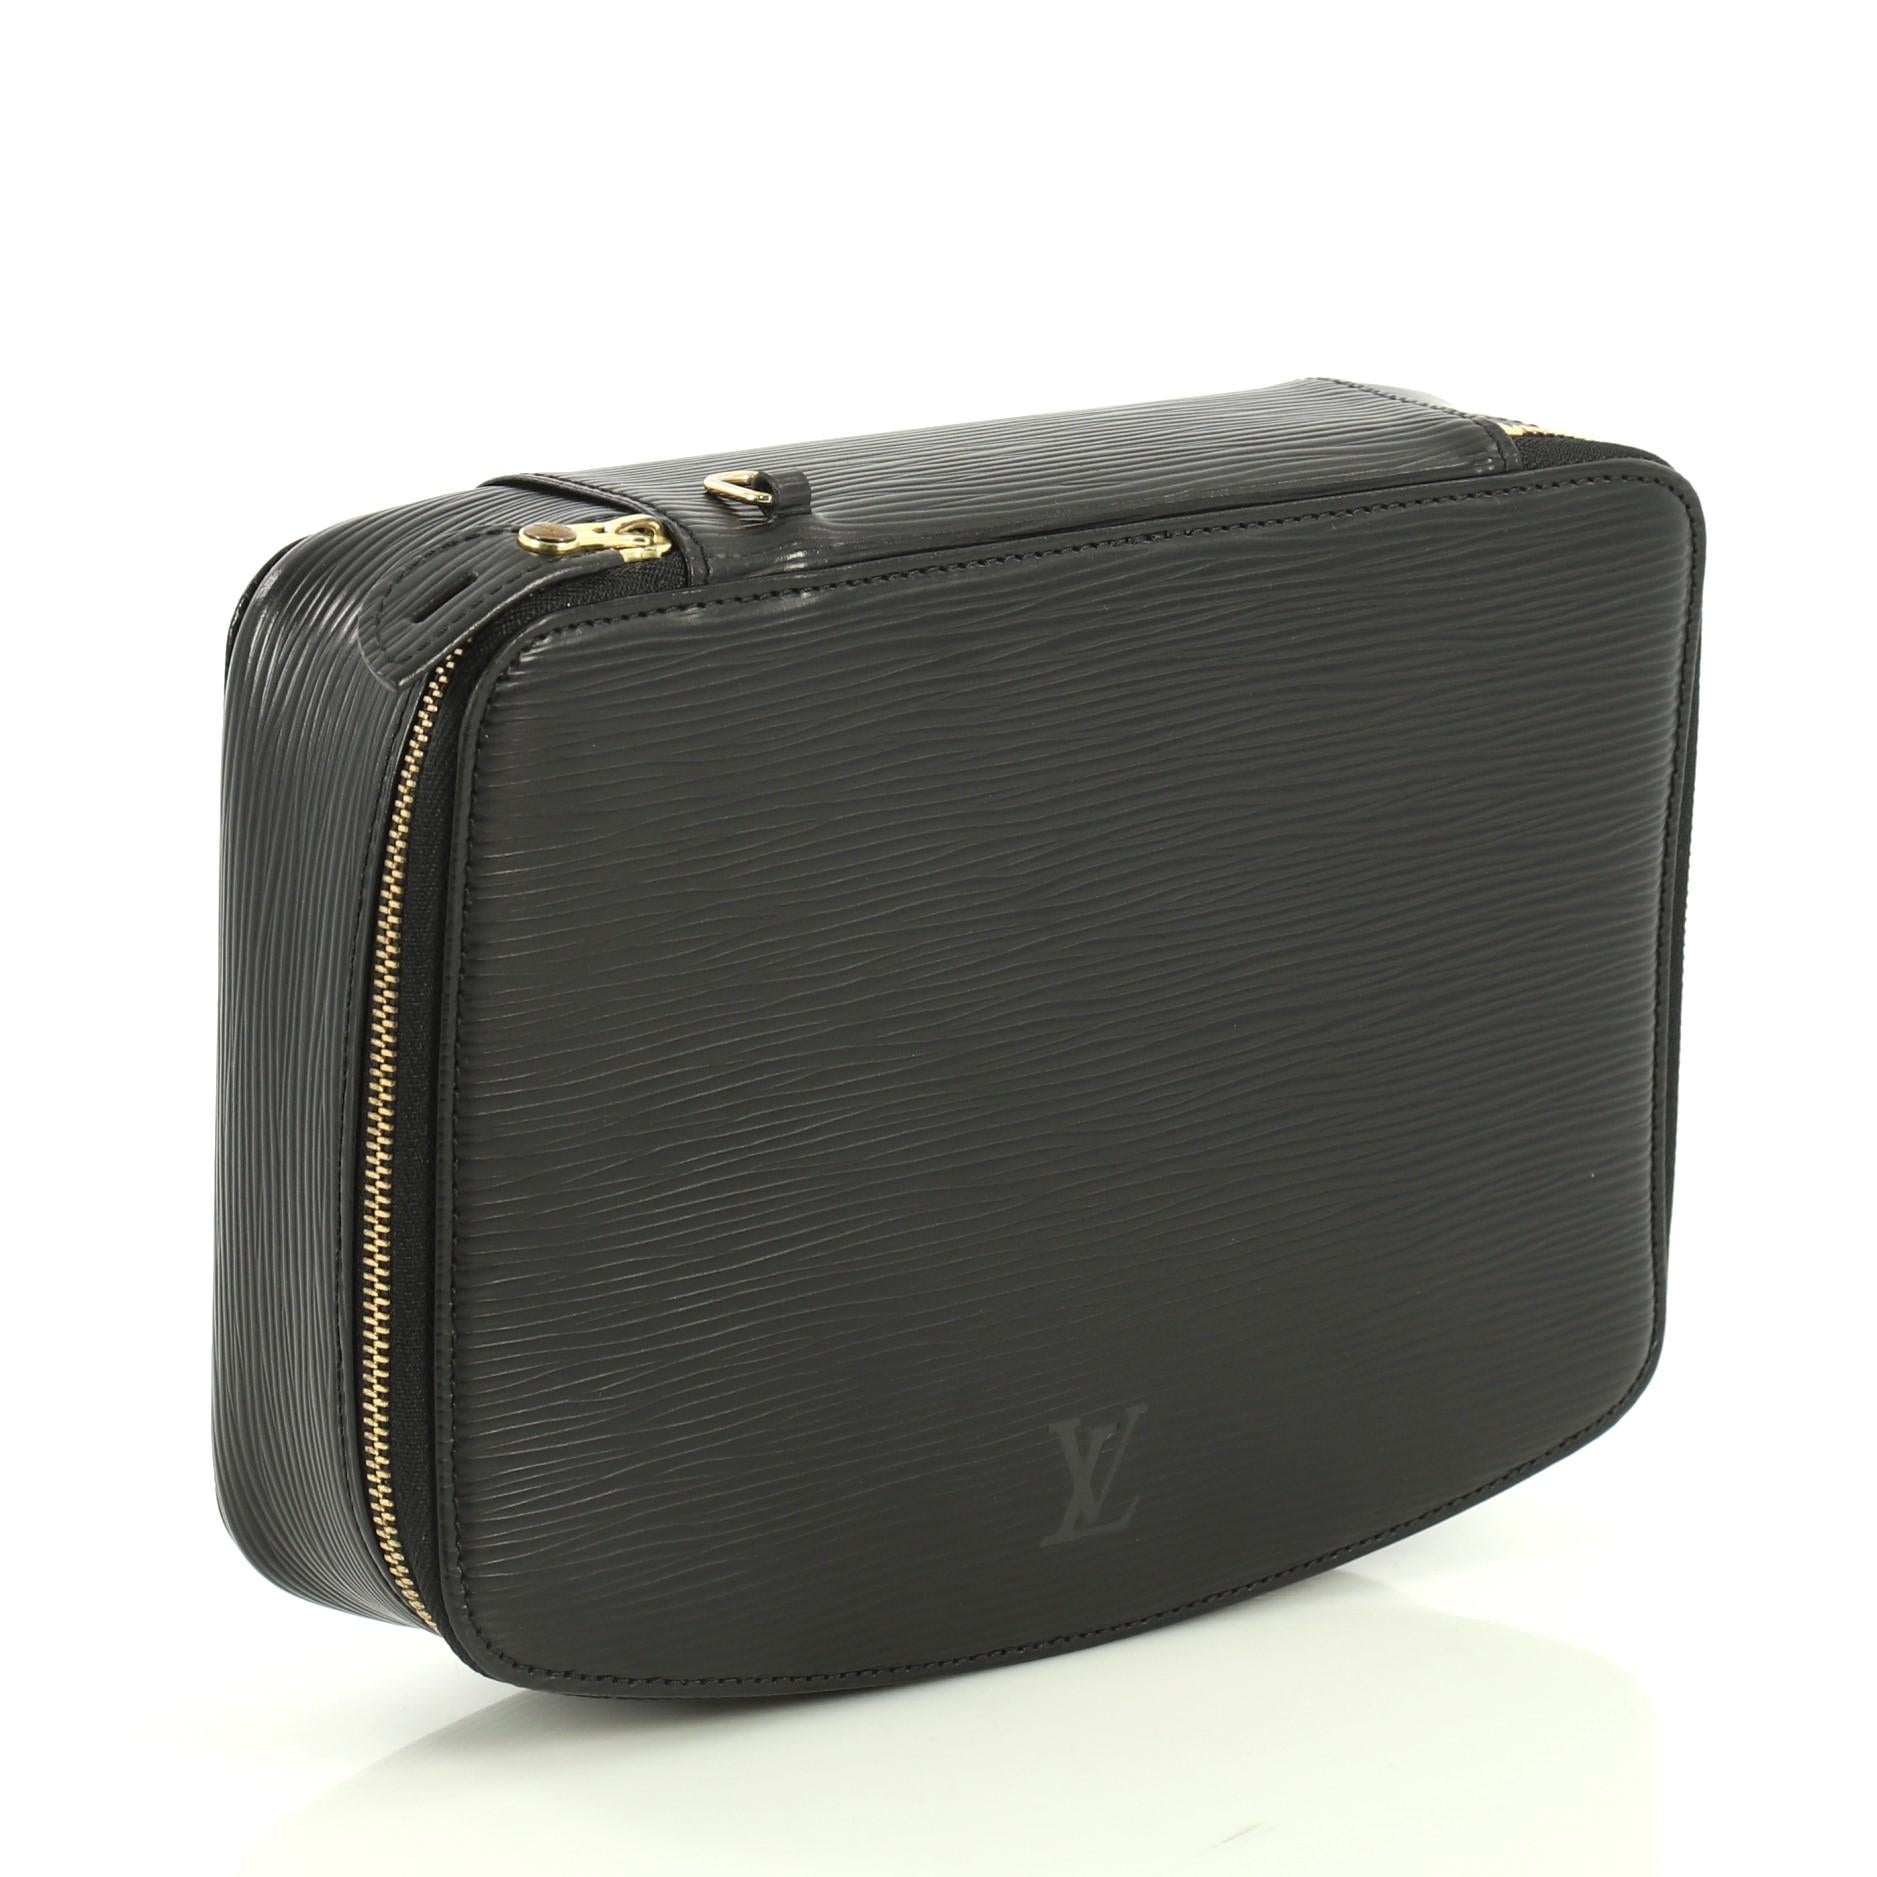 This Louis Vuitton Monte-Carlo Jewelry Box Epi Leather, crafted from black epi leather, features gold-tone hardware. Its zip-around closure opens to a gray microfiber interior with multiple pouch zip pockets. Authenticity code reads: MI0967.